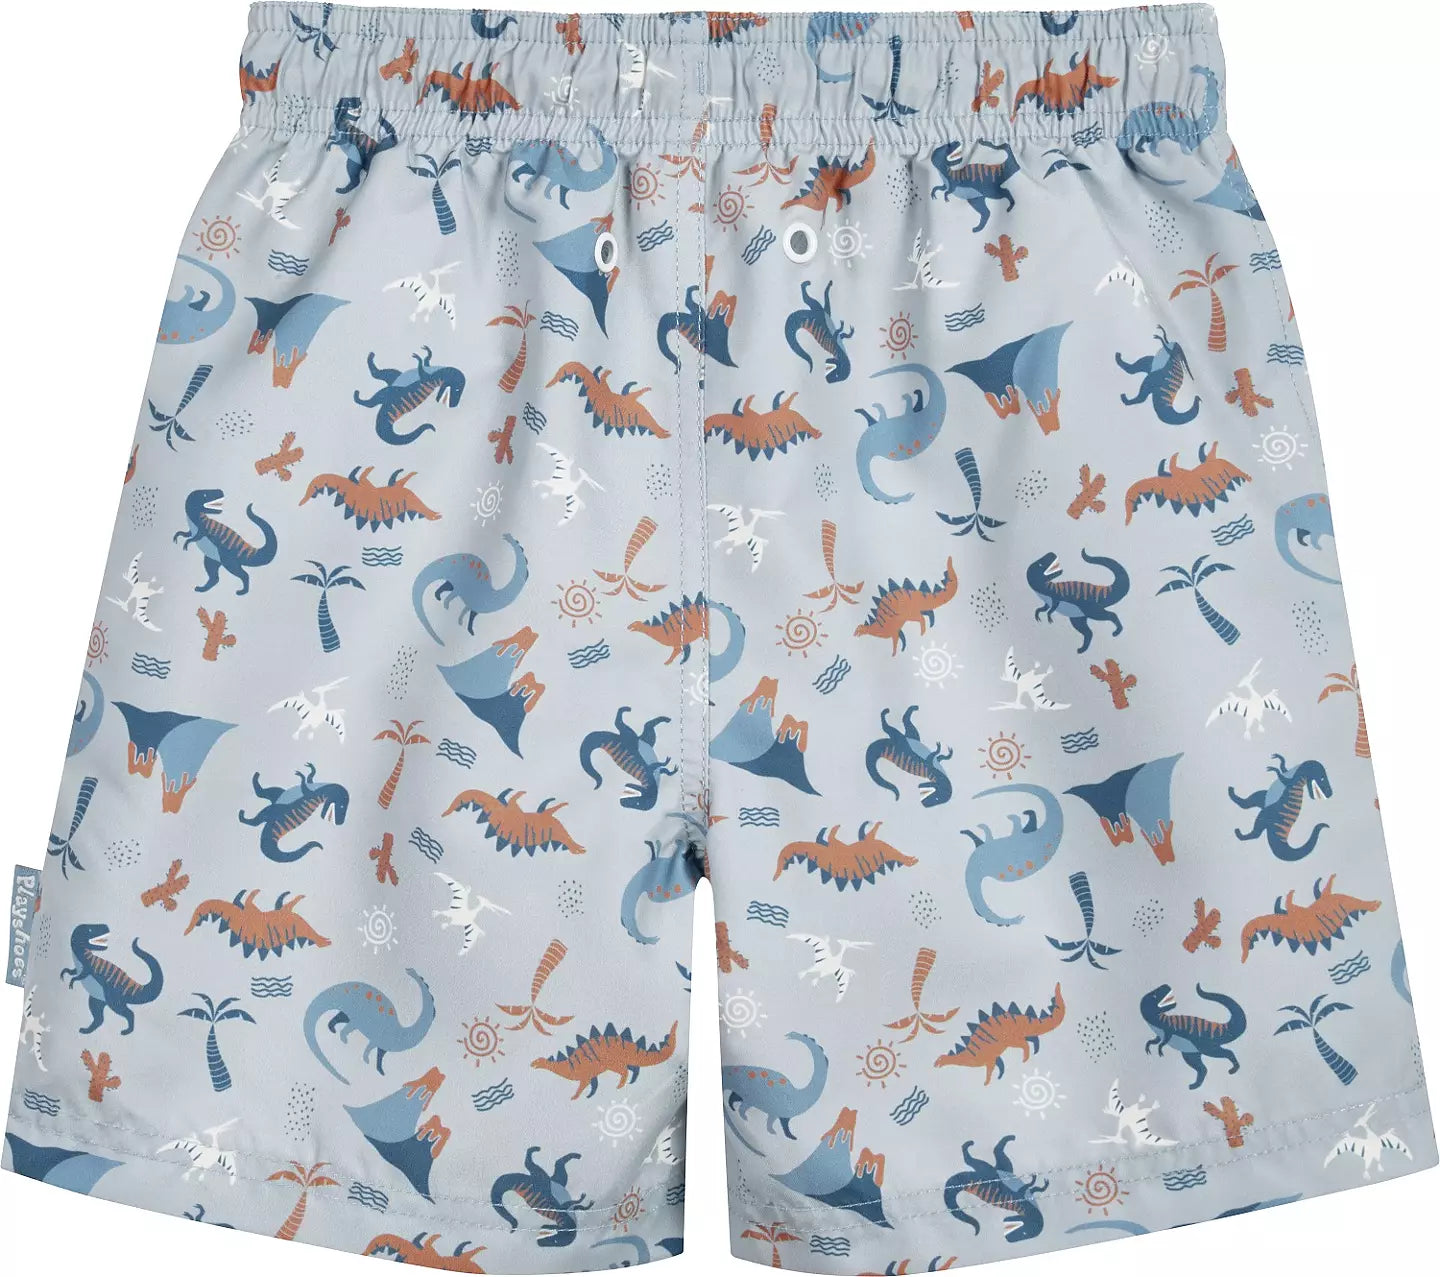 Playshoes Beach-Shorts Dino Allover